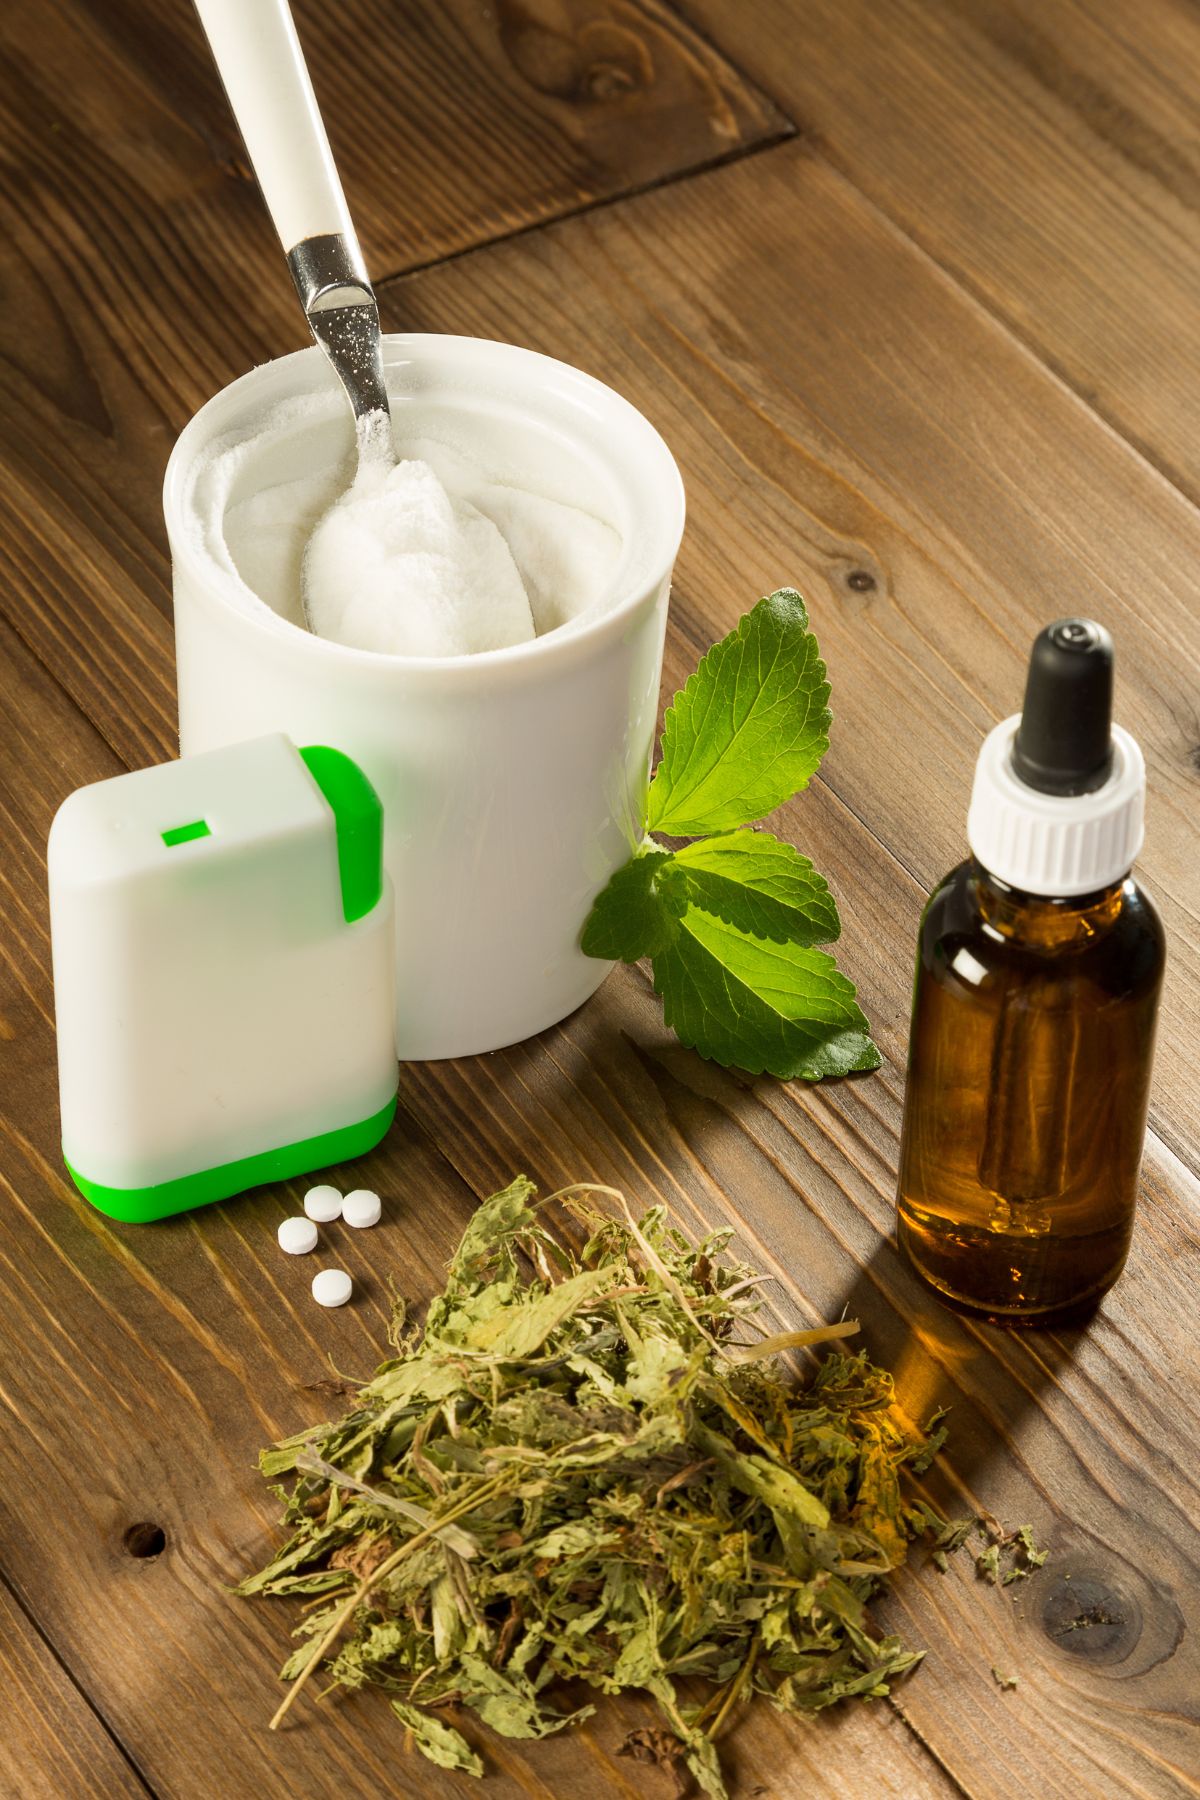 various types of stevia leaf extract in powder and liquid form.